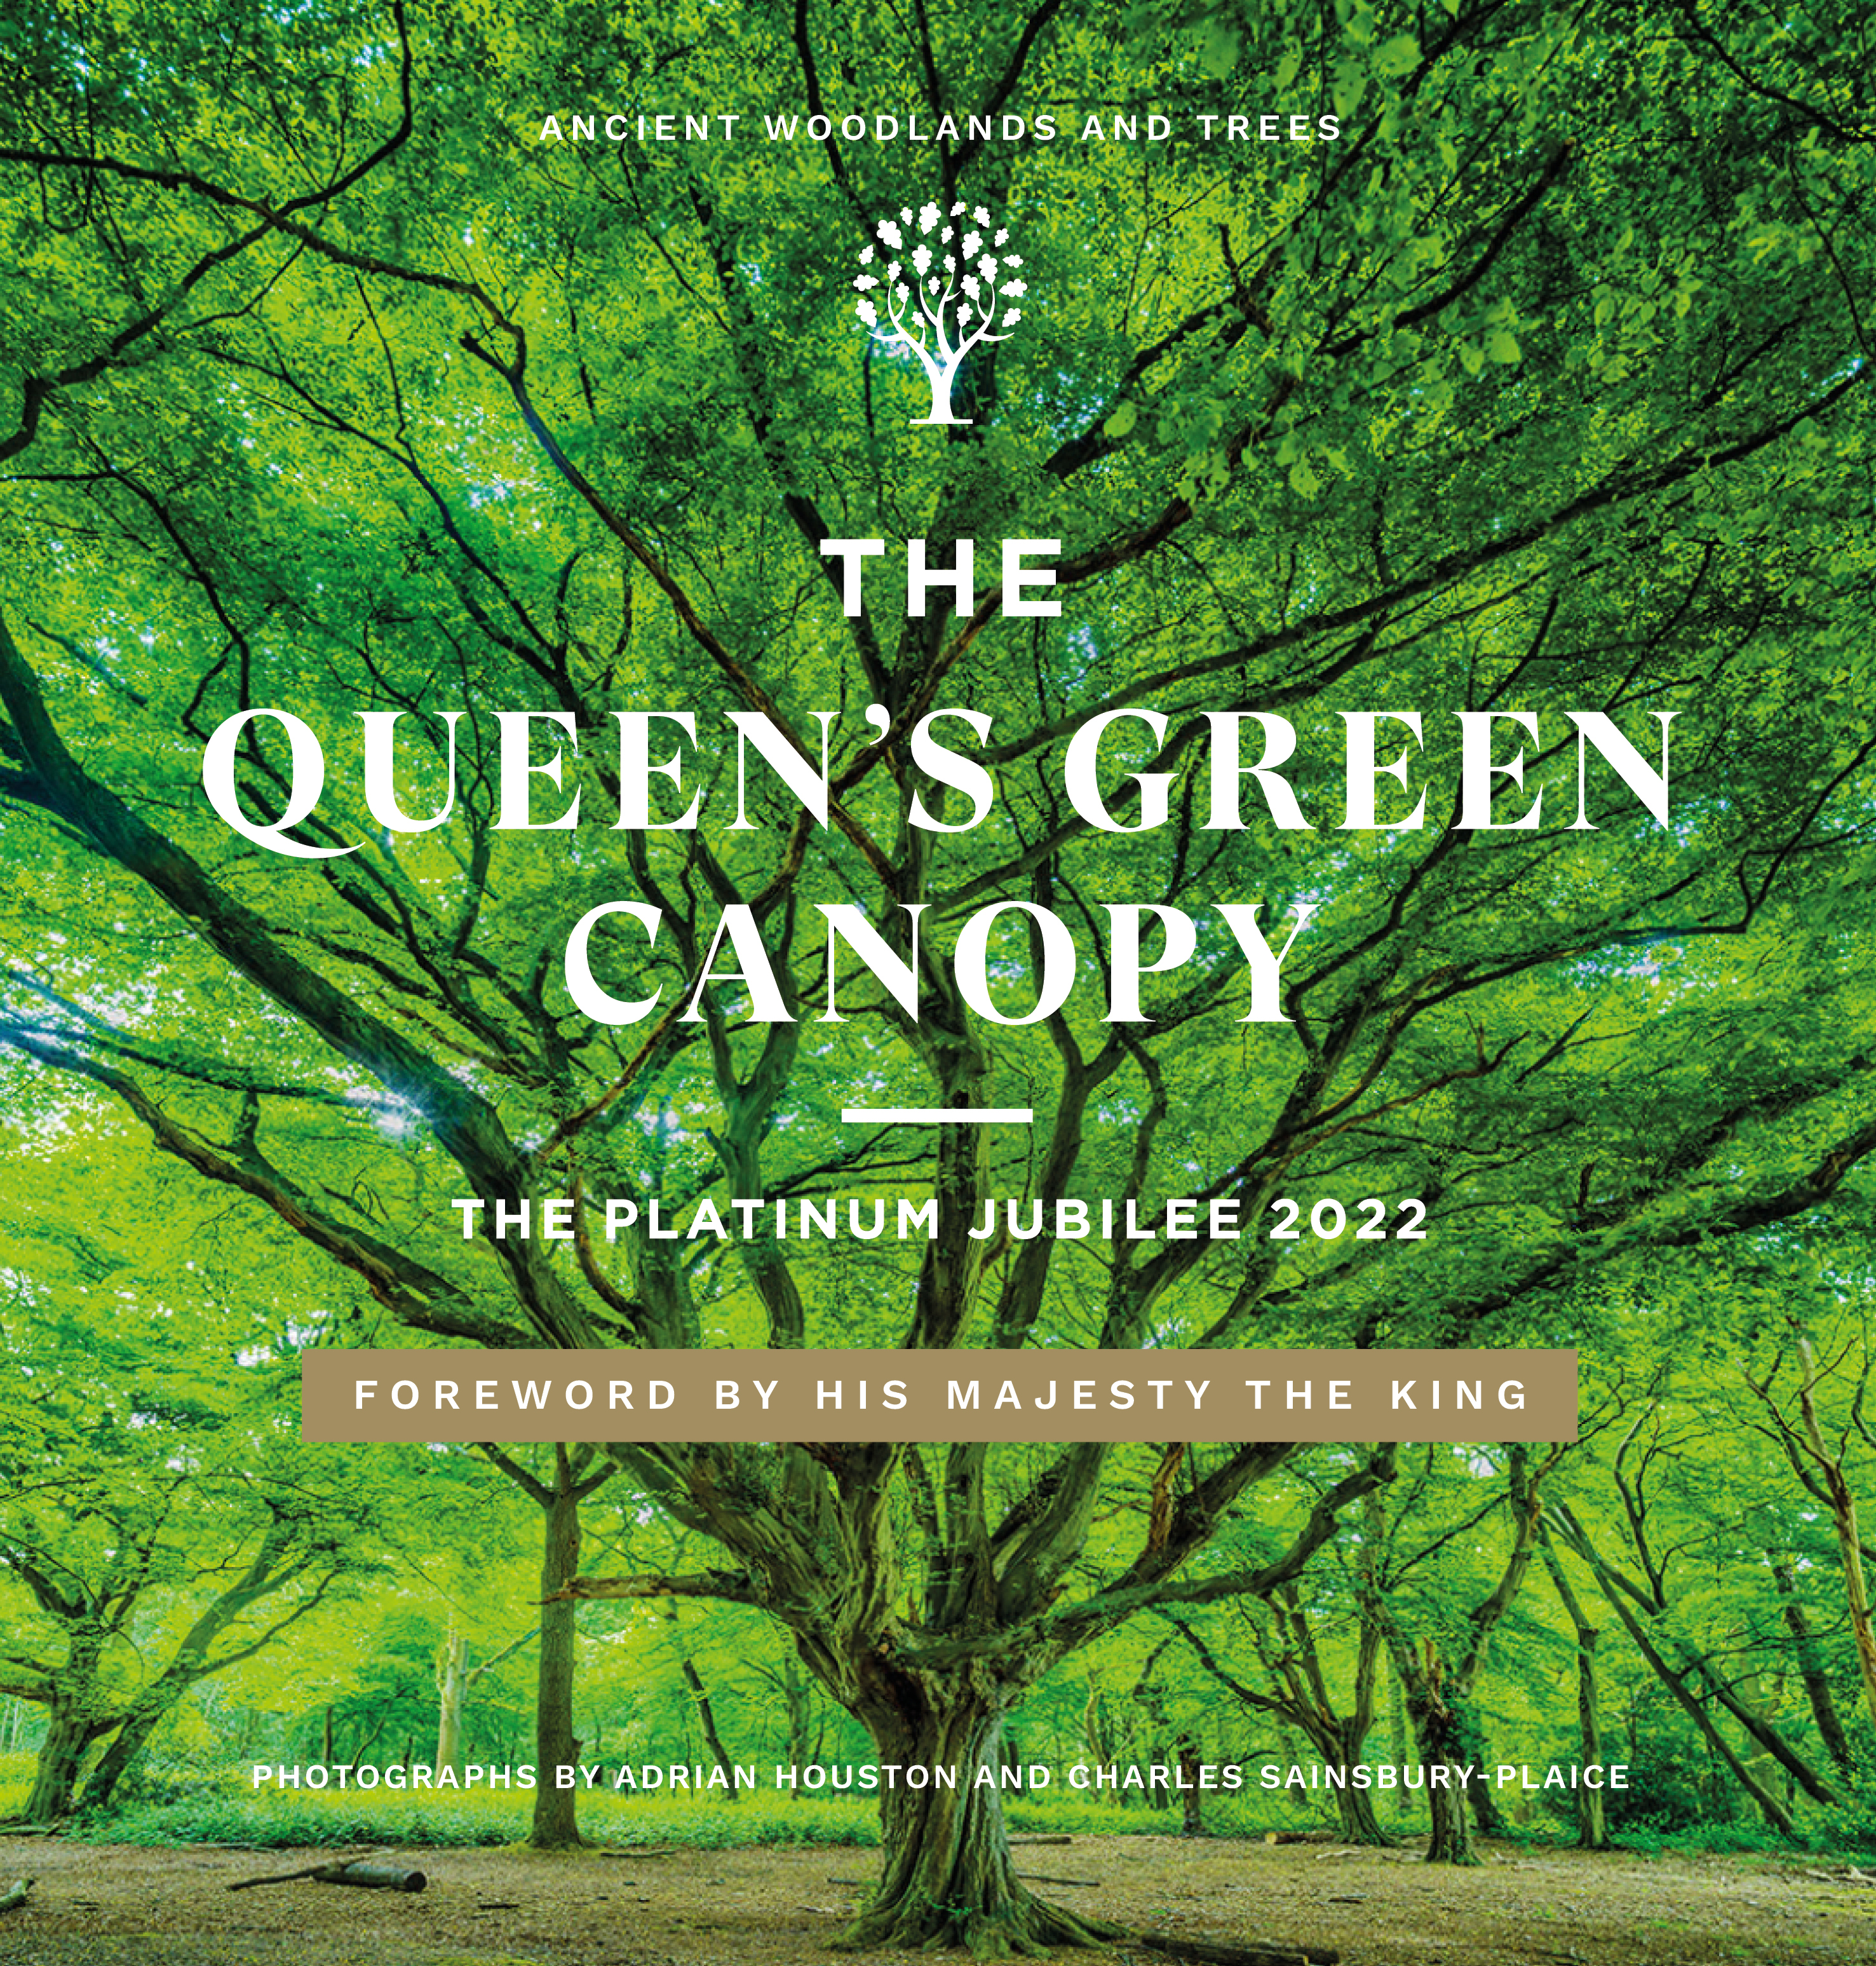 The Queen's Green Canopy book